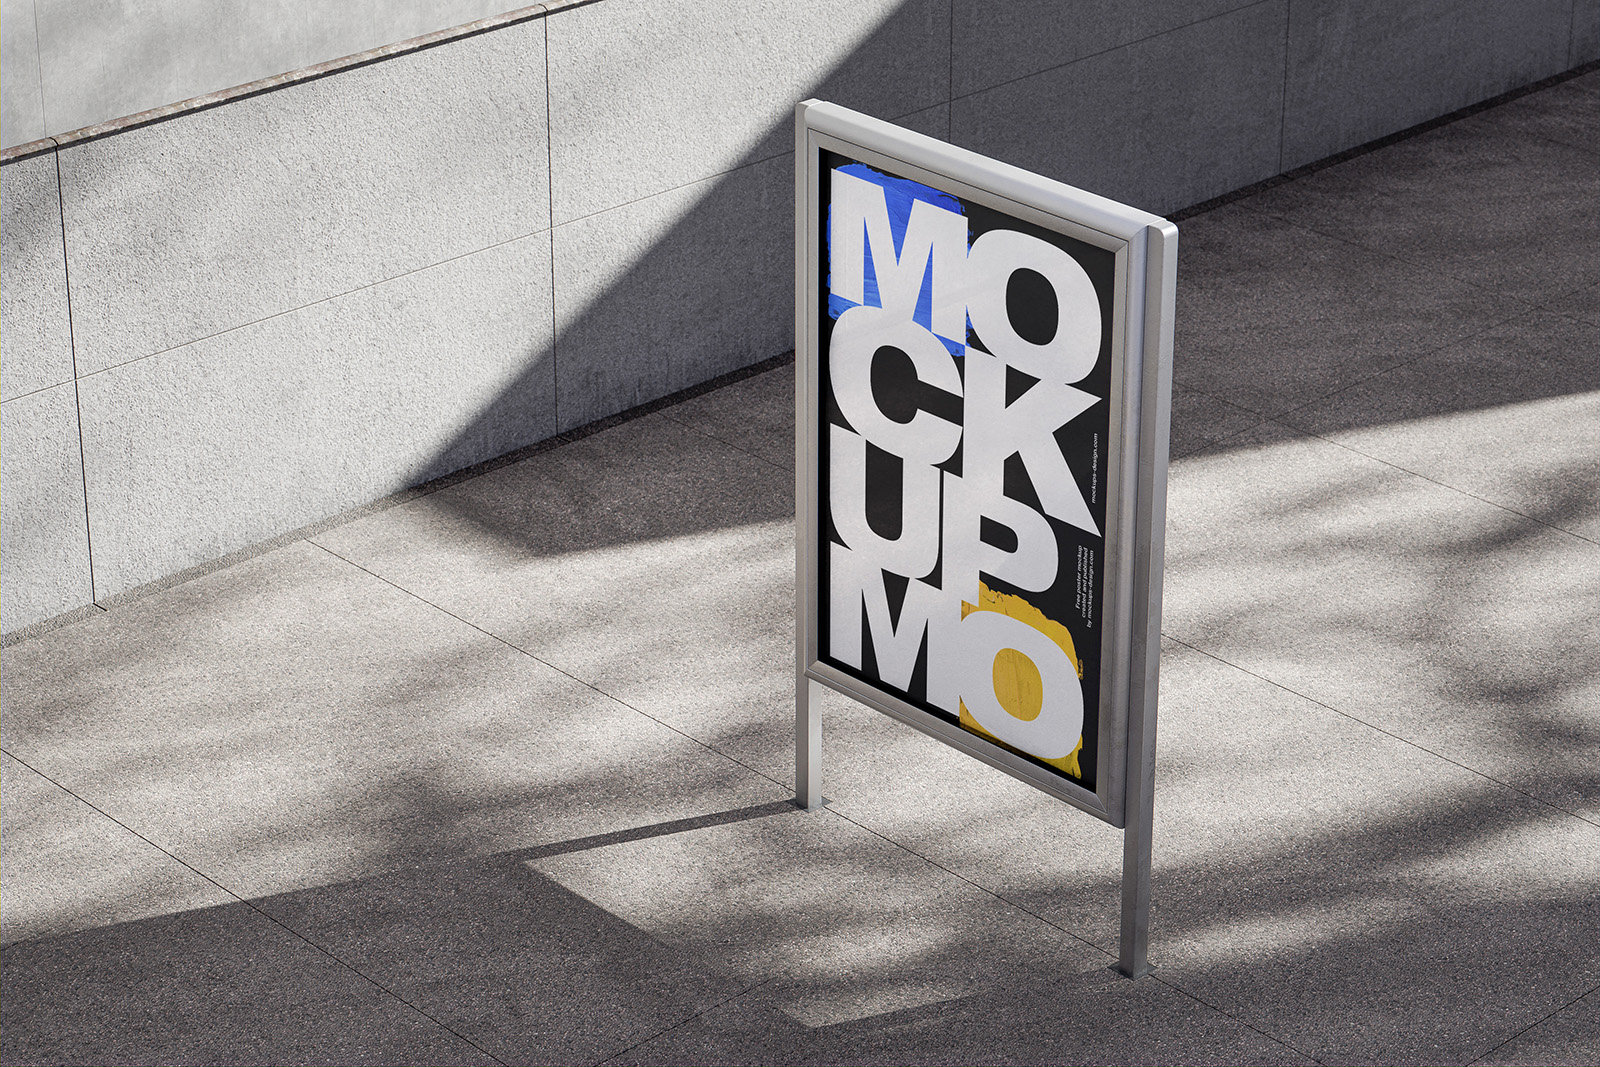 4 Exhibition Citylight Mockups in Perspective Views FREE PSD